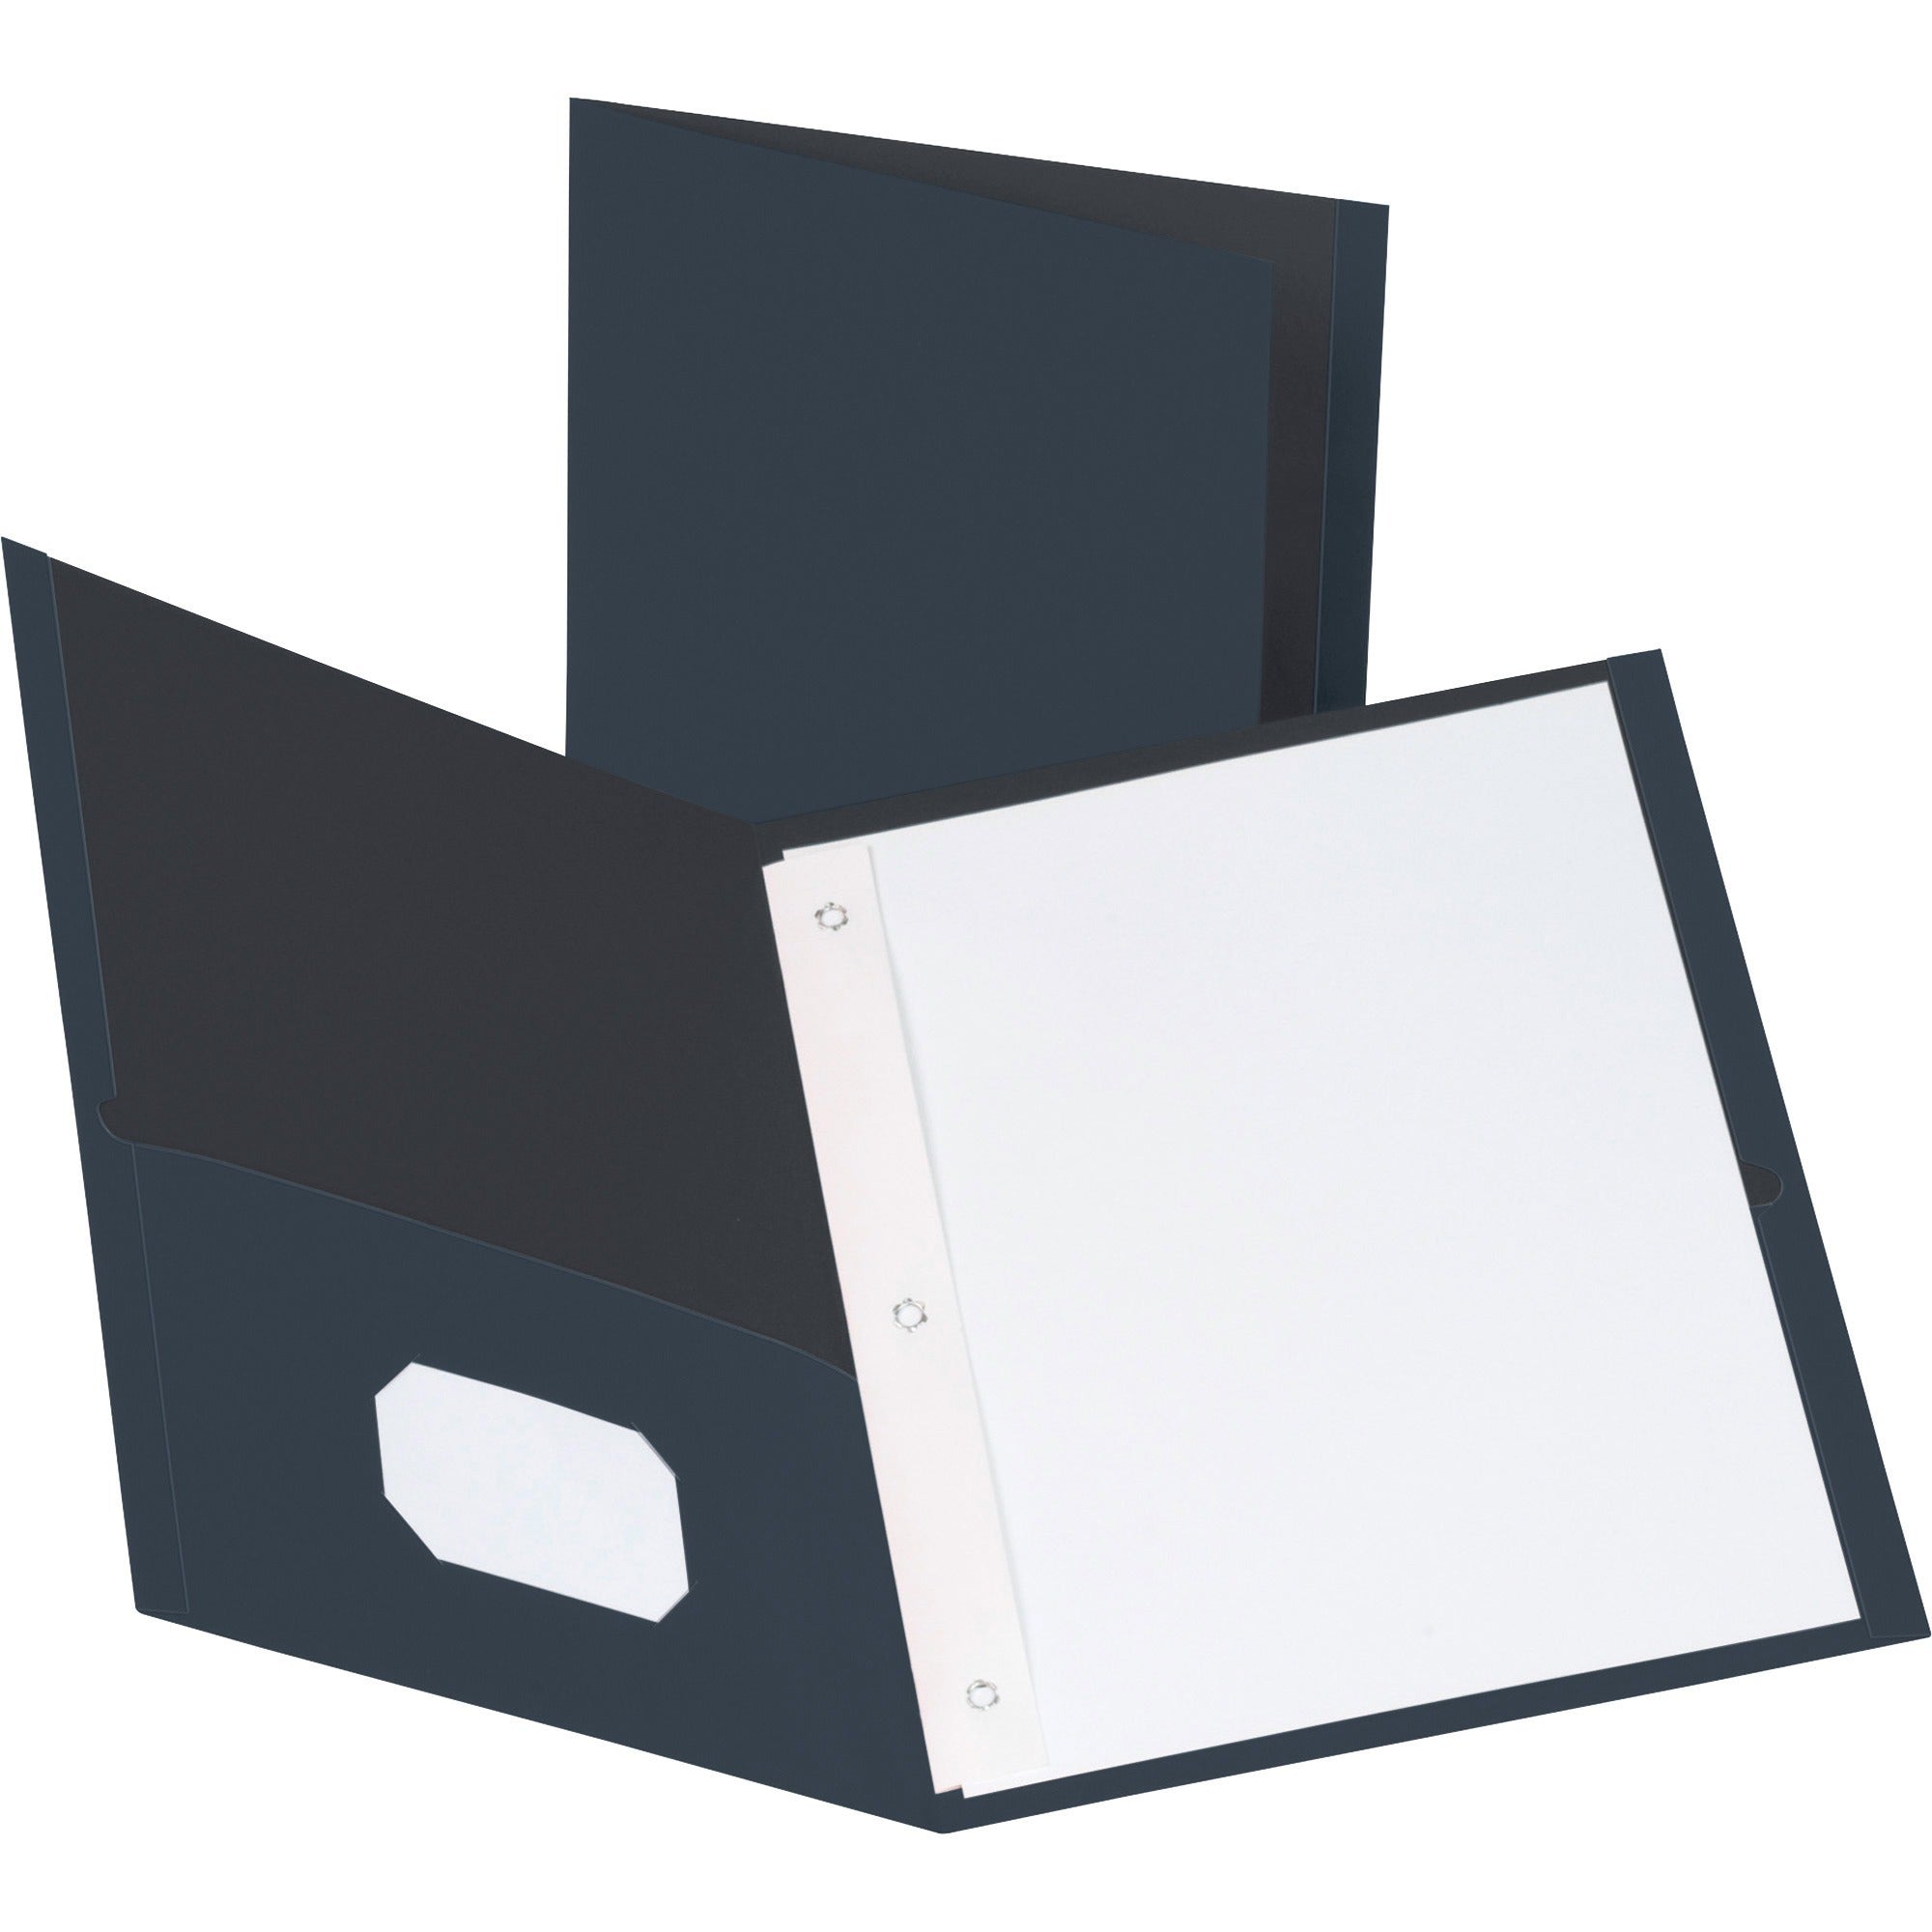 Business Source Letter Recycled Pocket Folder - 8 1/2" x 11" - 100 Sheet Capacity - 3 x Prong Fastener(s) - 1/2" Fastener Capacity - 2 Inside Front & Back Pocket(s) - Leatherette - Dark Blue - 35% Recycled - 25 / Box - 